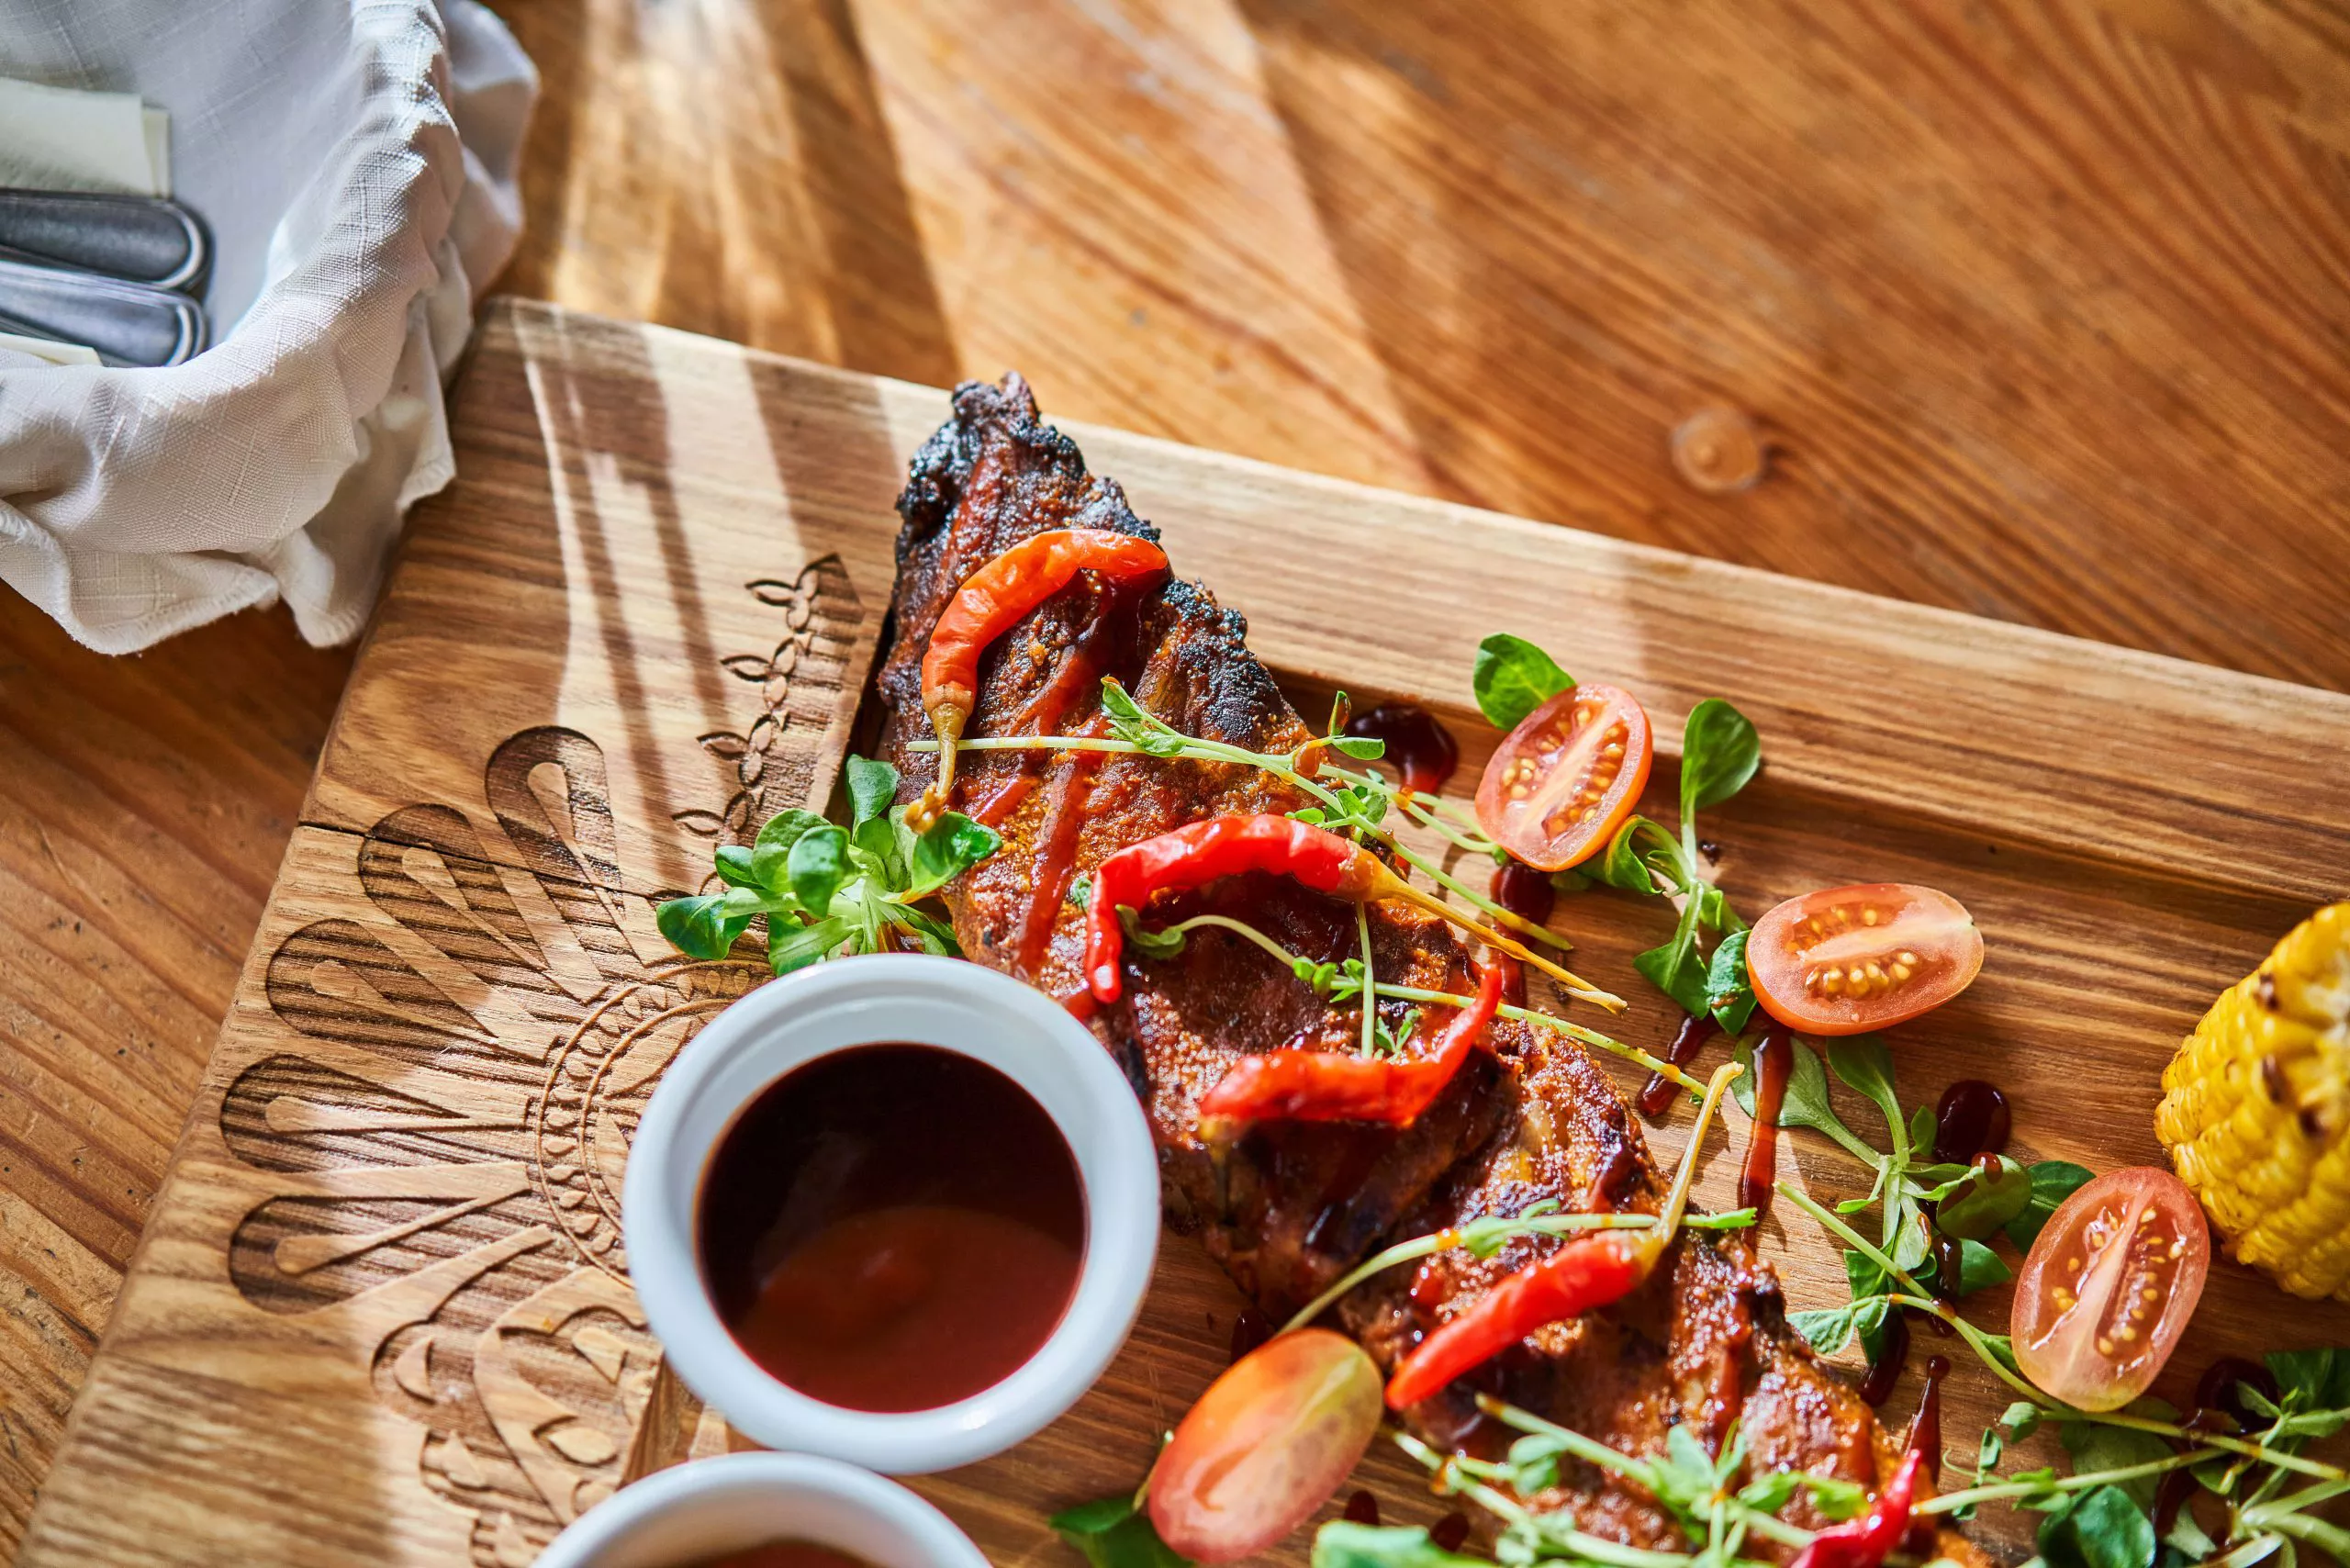 Pork ribs garnished with chilis, cherry tomatoes, and lamb’s lettuce leaves, are arranged on a wooden board, its Polish highland ornamentation partly covered by ramekins with sauce. A corner of a cloth-lined basket with some cutlery was caught in the top left-hand corner of the shot.